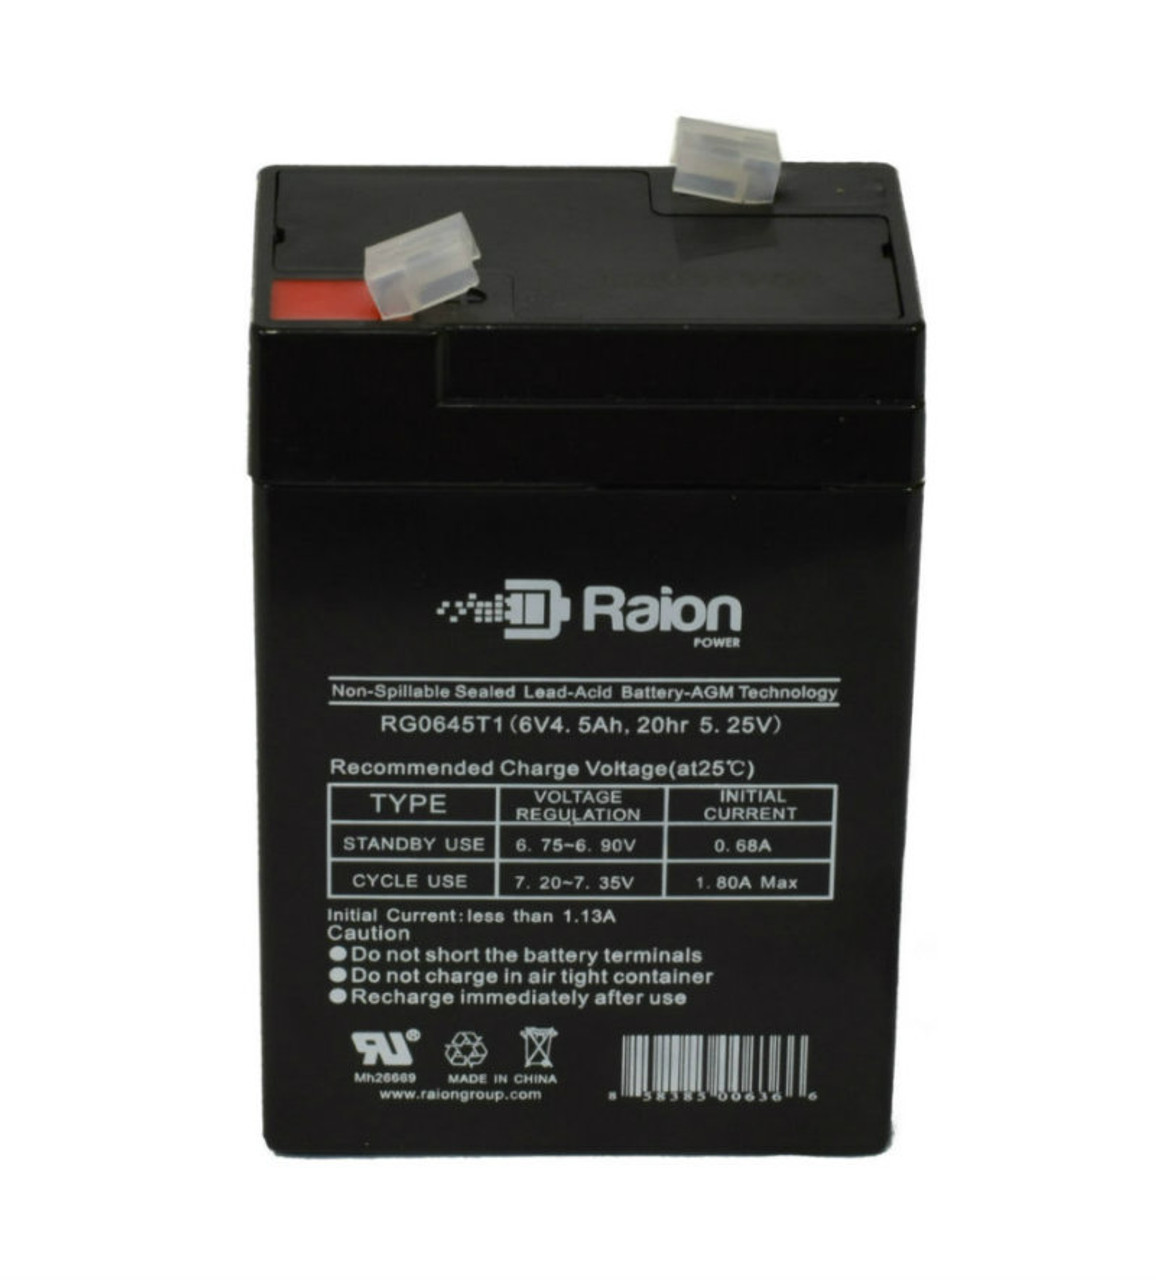 Raion Power RG0645T1 Replacement Battery Cartridge for RiiRoo 12V Mercedes G65 AMG Ride On